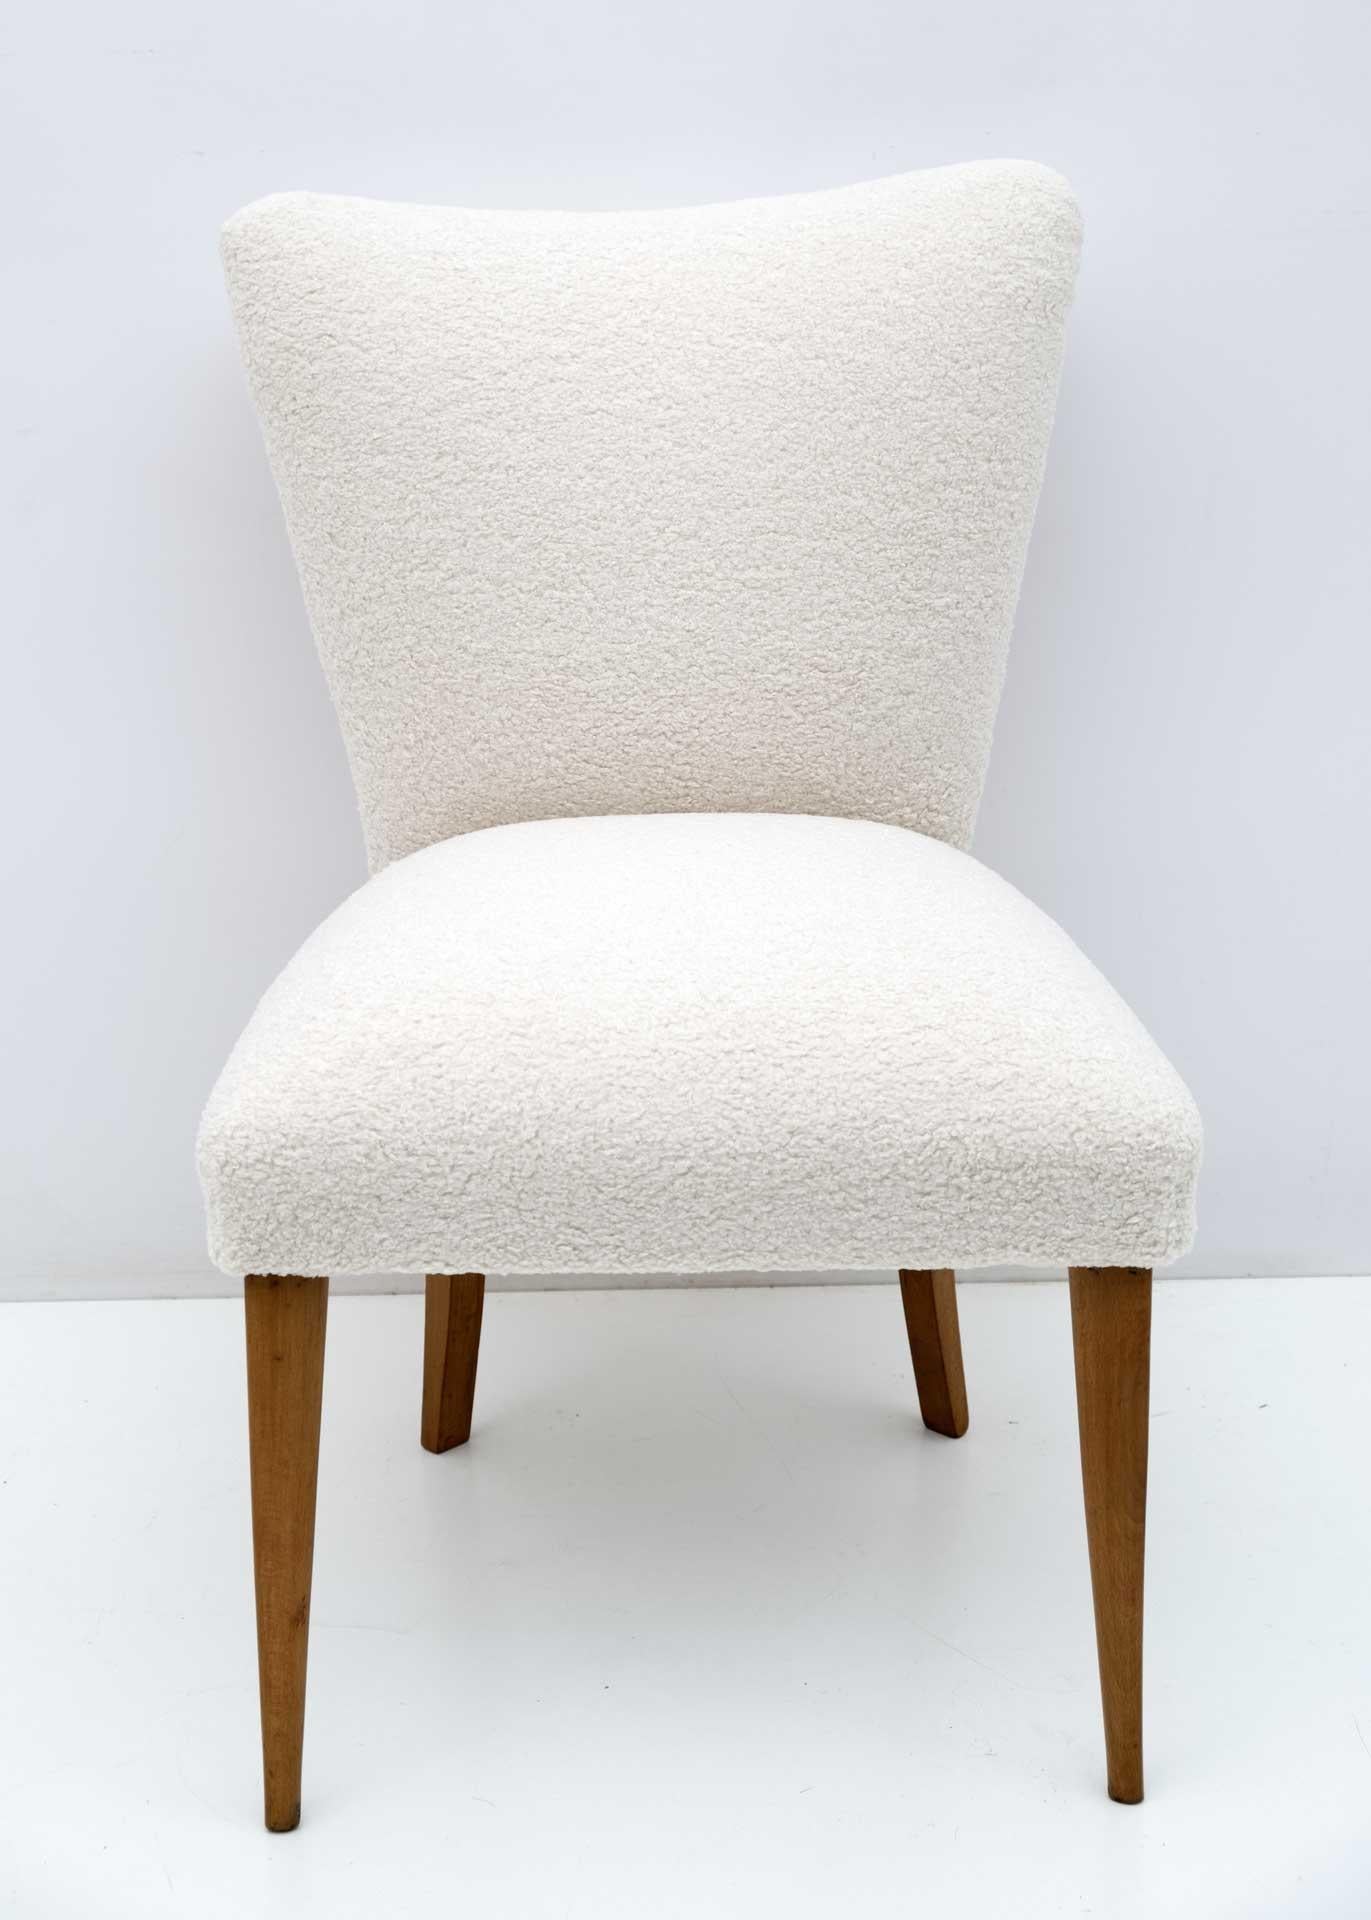 Small Mid-Century Modern armchair, Italian production from the 1950s, completely restored and upholstered in Boucle fabric. It fits very well in a bedroom or living room.